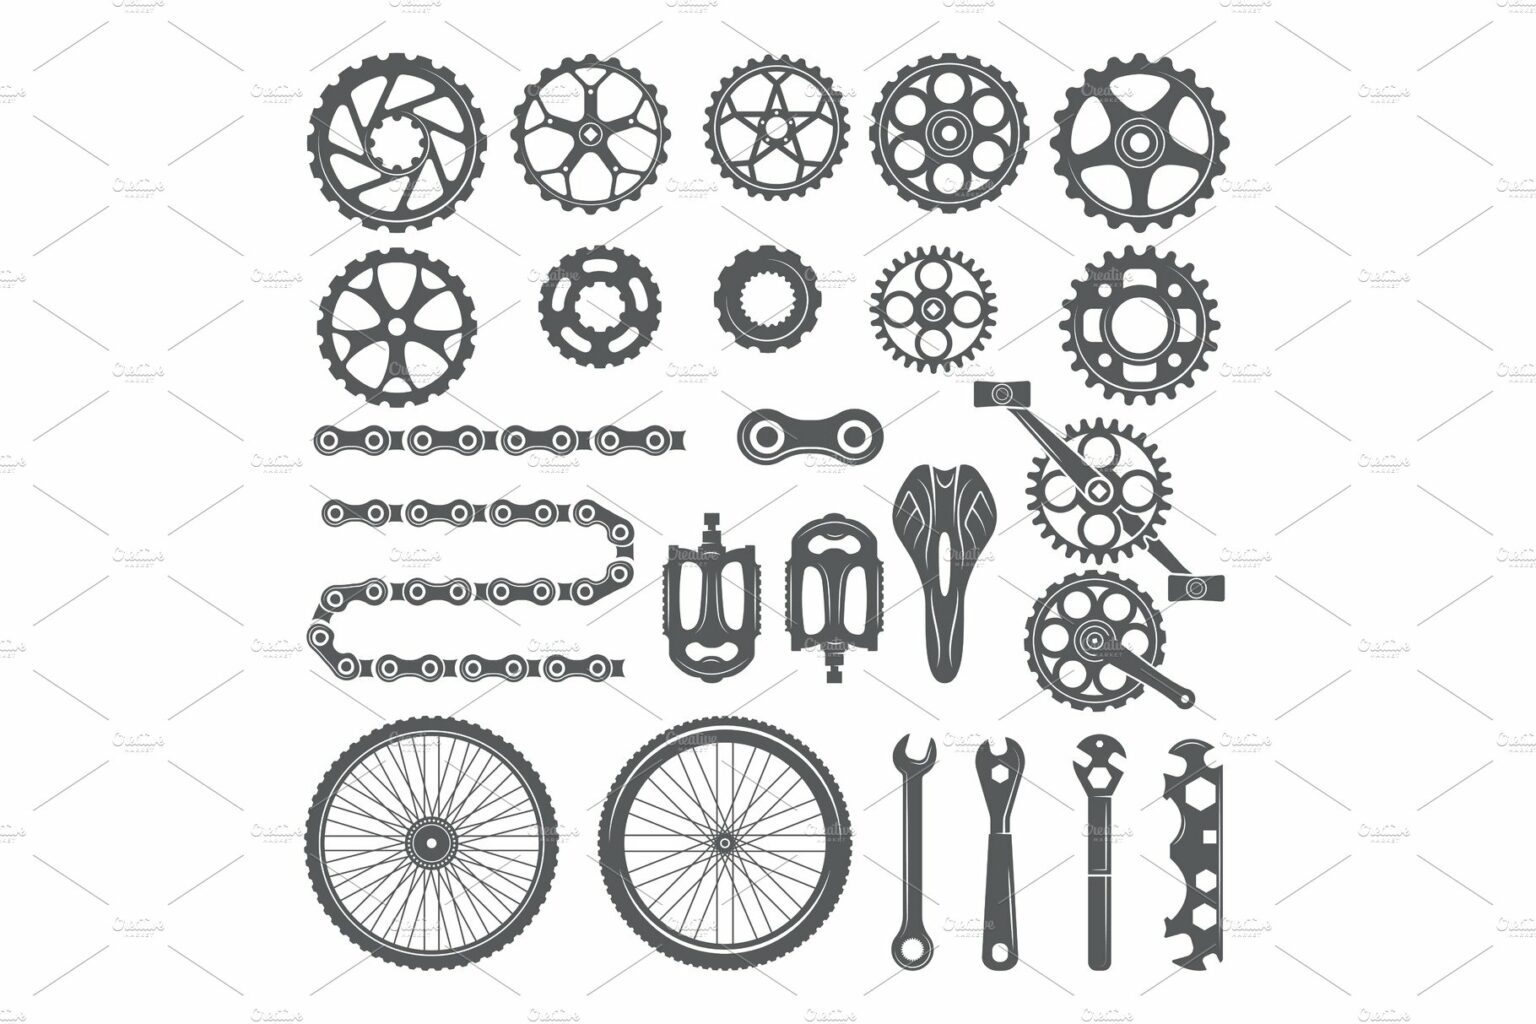 gears-chains-wheels-and-other-different-parts-of-bicycle-masterbundles